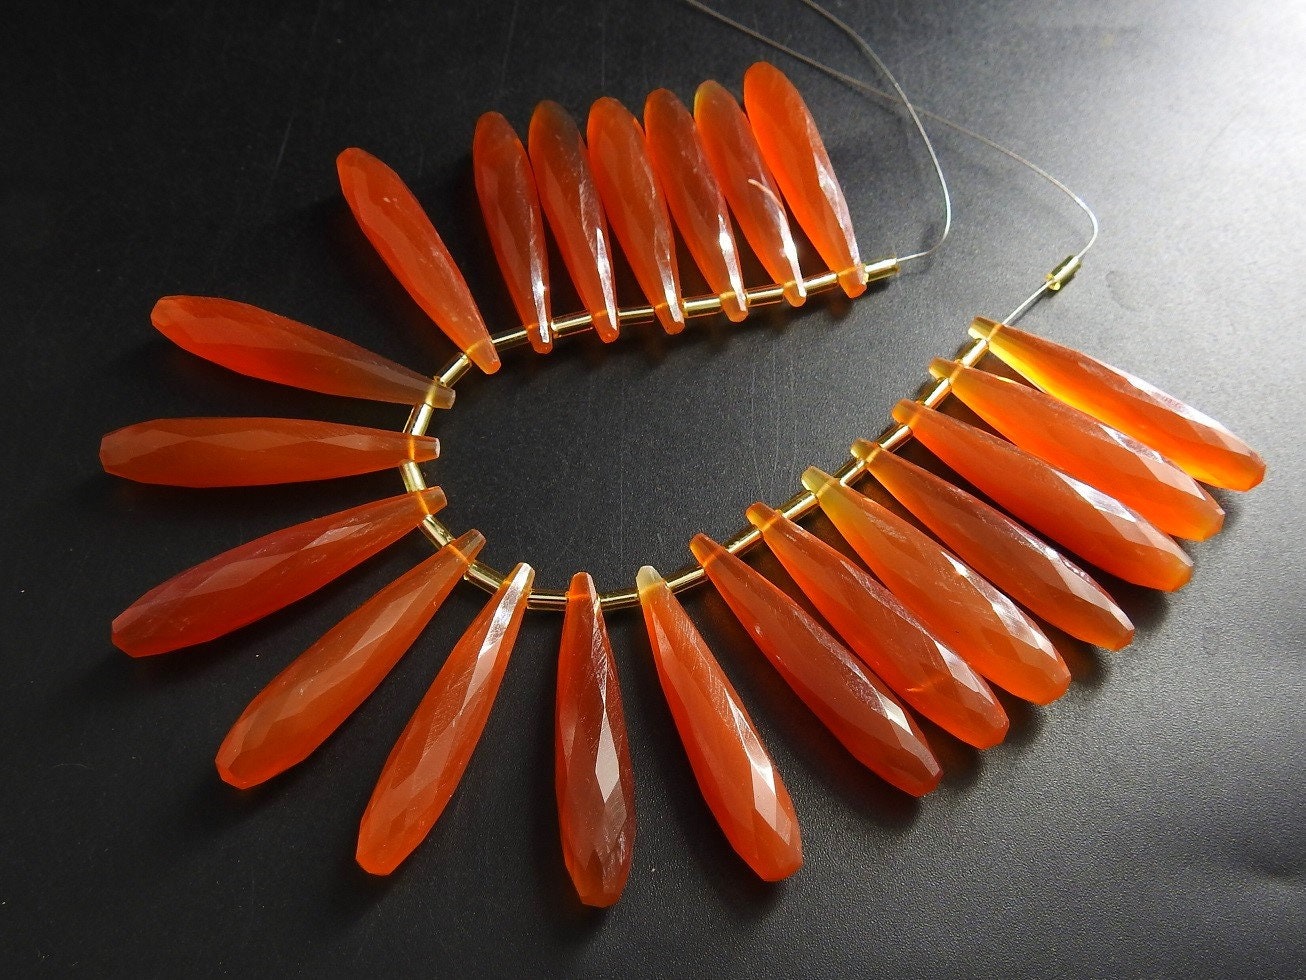 35MM Long Pair,Fanta Orange Chalcedony Faceted Elongated Drops,Teardrop,Loose Stone,Earrings,For Making Jewelry,Wholesaler,Supplies (pme)CY1 | Save 33% - Rajasthan Living 14